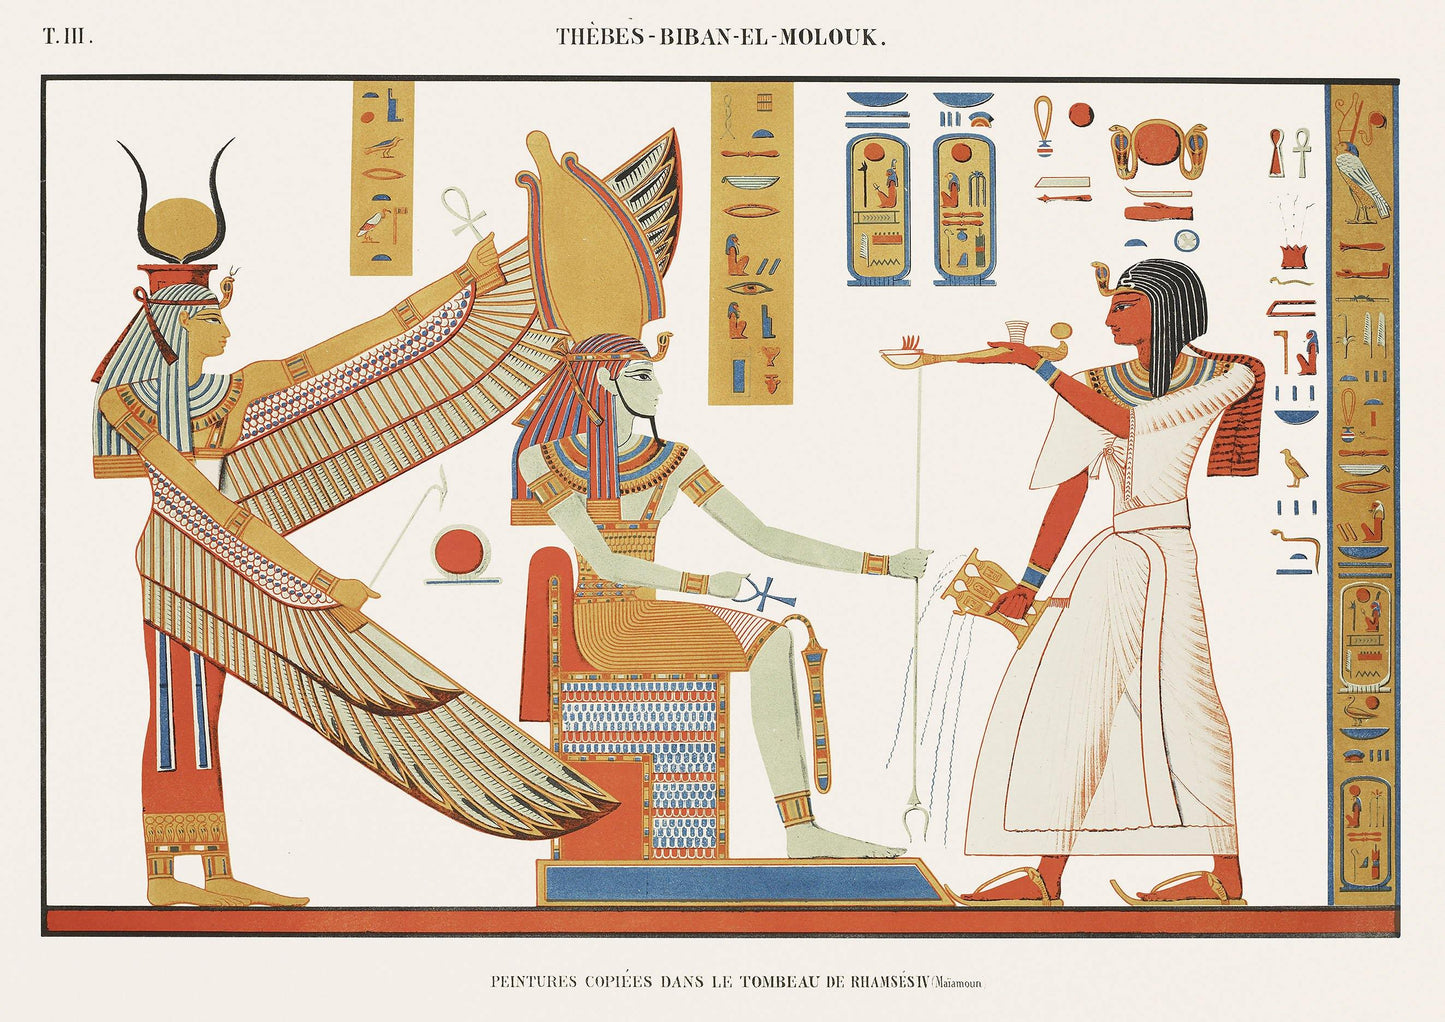 EGYPTIAN THEBES PRINT: Ramses IV Tomb Painting by Jean François Champollion - Pimlico Prints